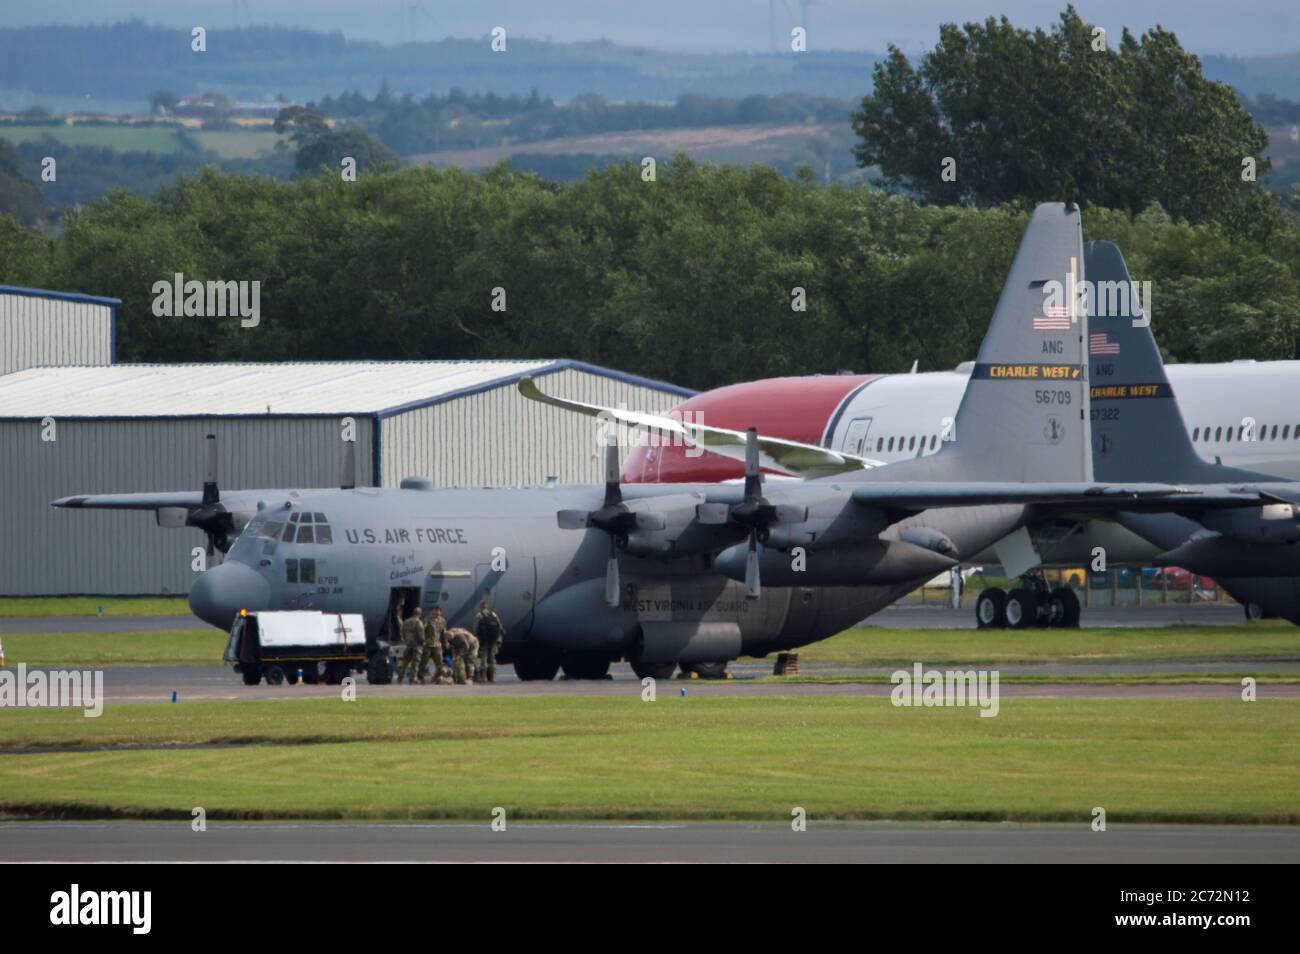 Prestwick, Scotland, UK. 13th July, 2020. Pictured: A US Air Force C130 Hercules Aircraft (Reg 56709) sit on the tarmac by the Ryanair Hanger as airforce personal deplane while the aircraft gets fuelled. Credit: Colin Fisher/Alamy Live News Stock Photo